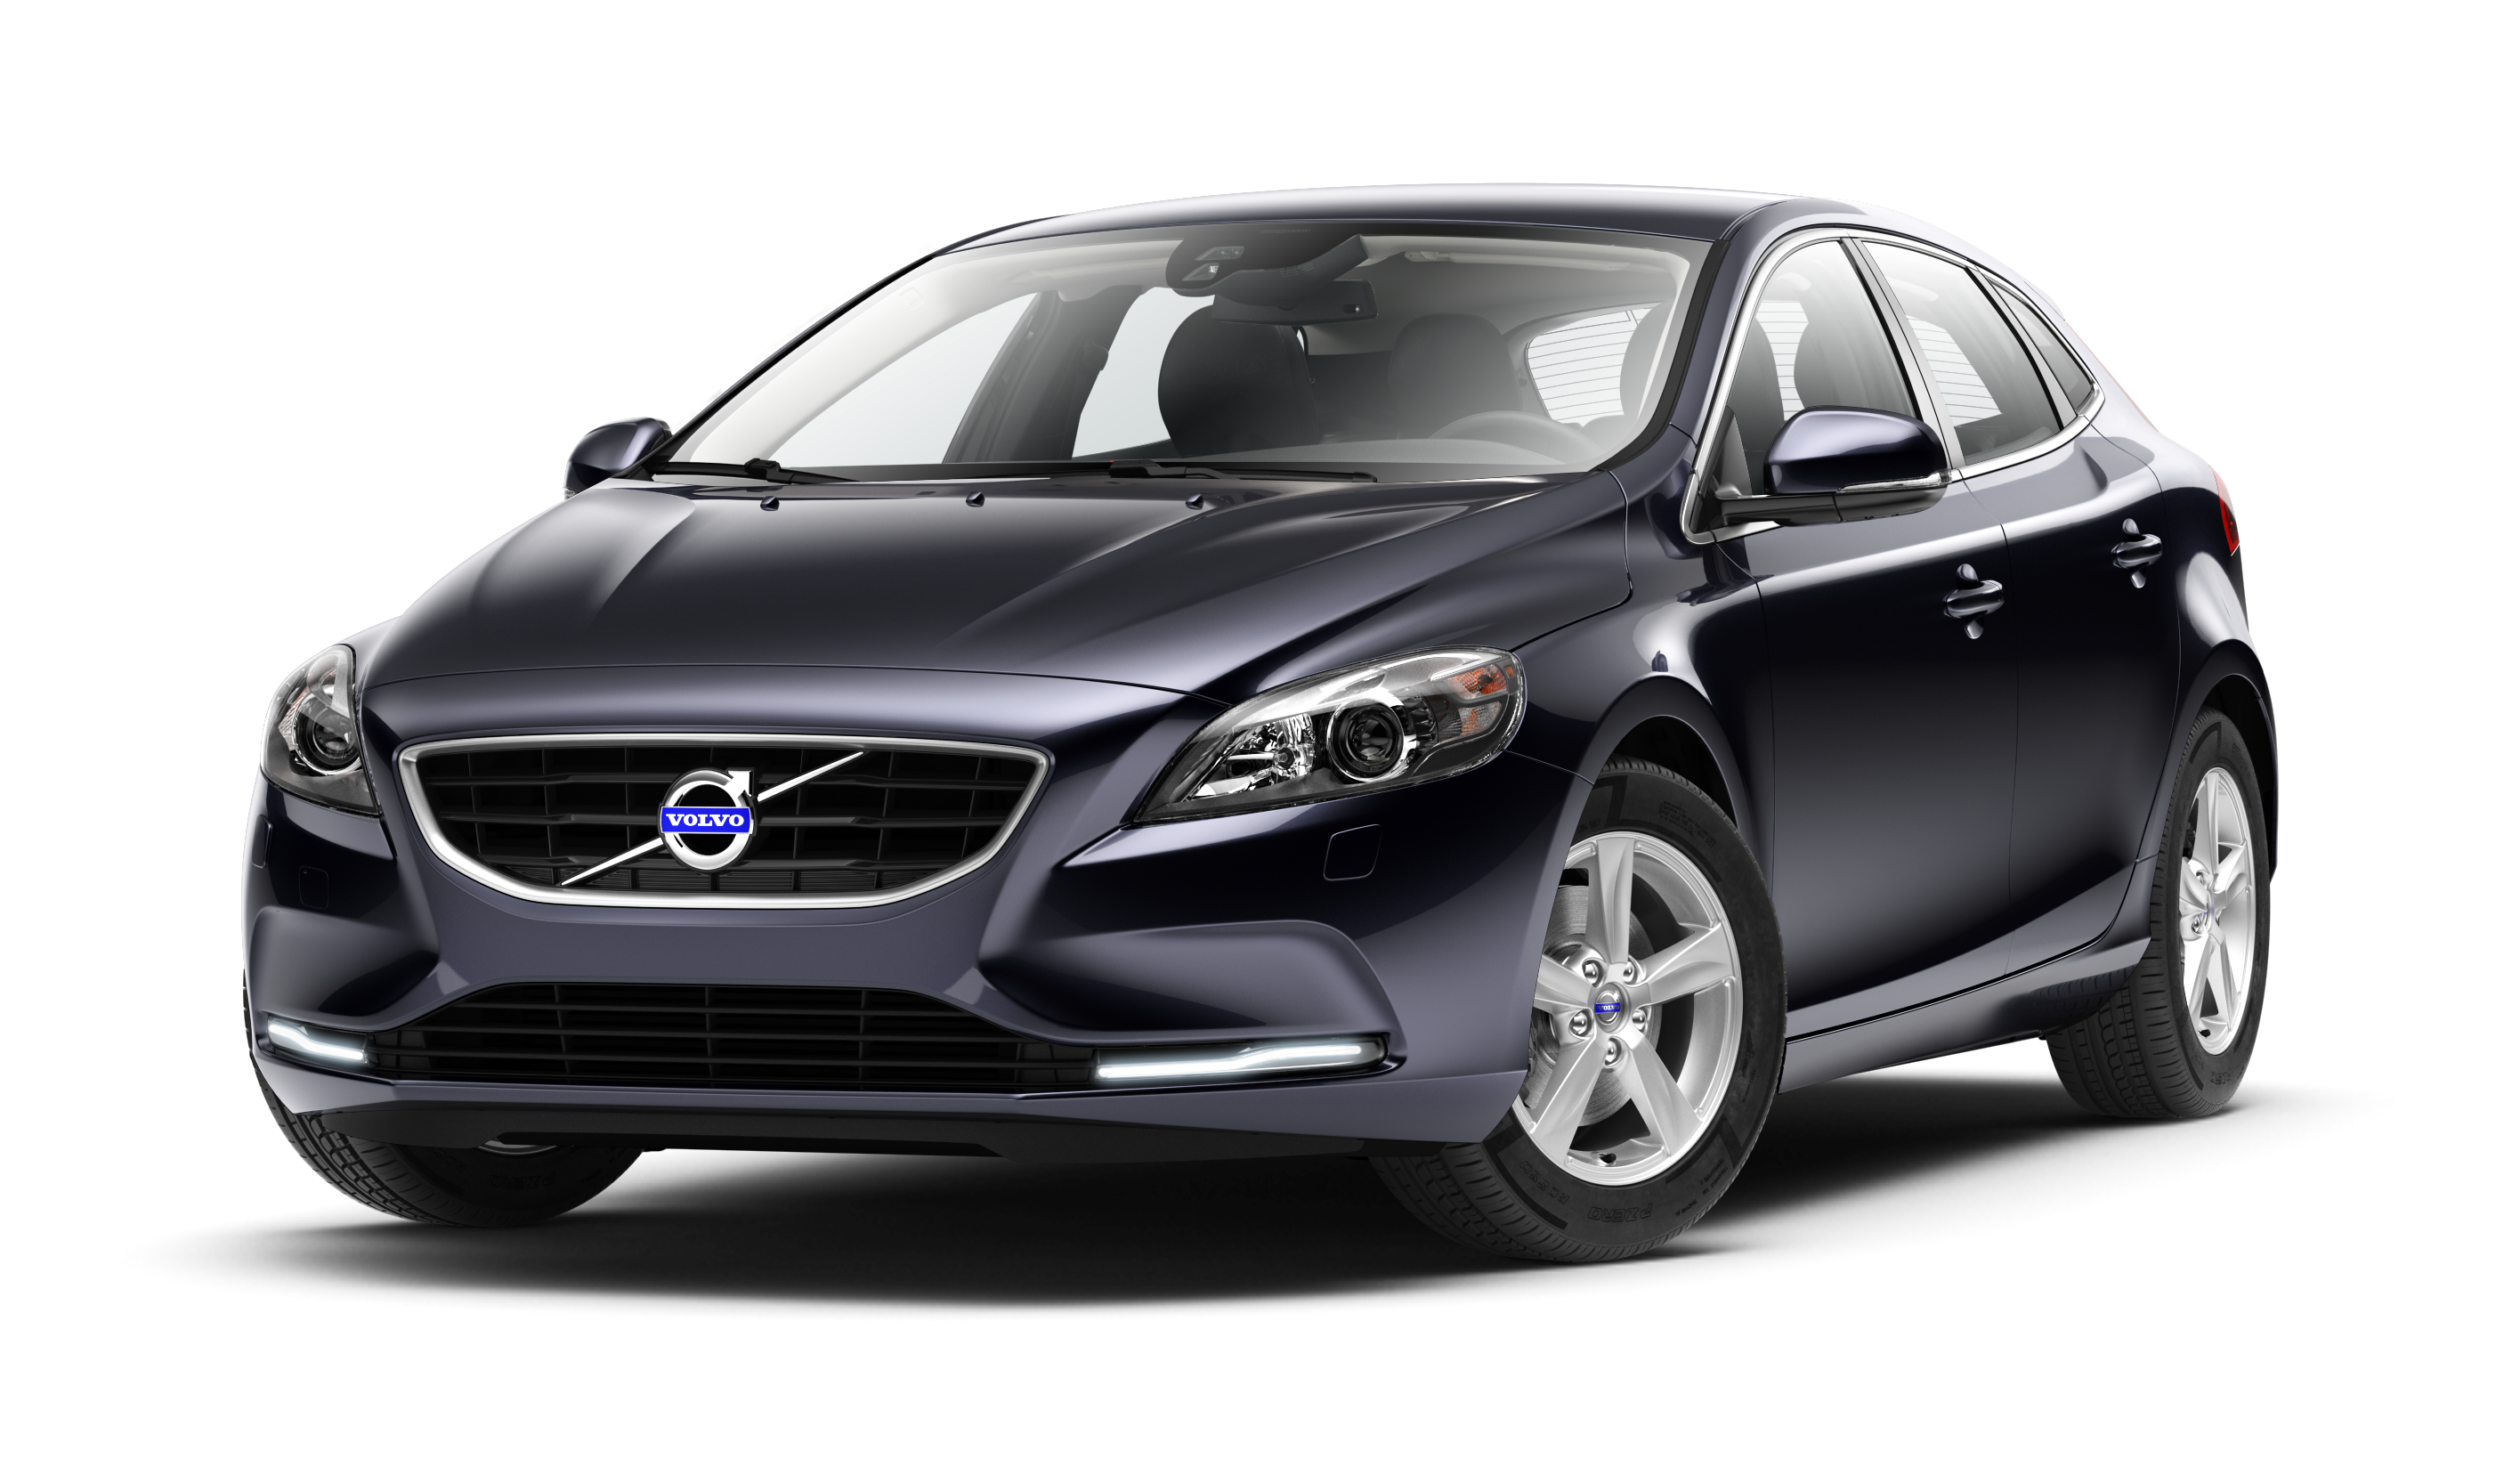 Volvo PNG images 